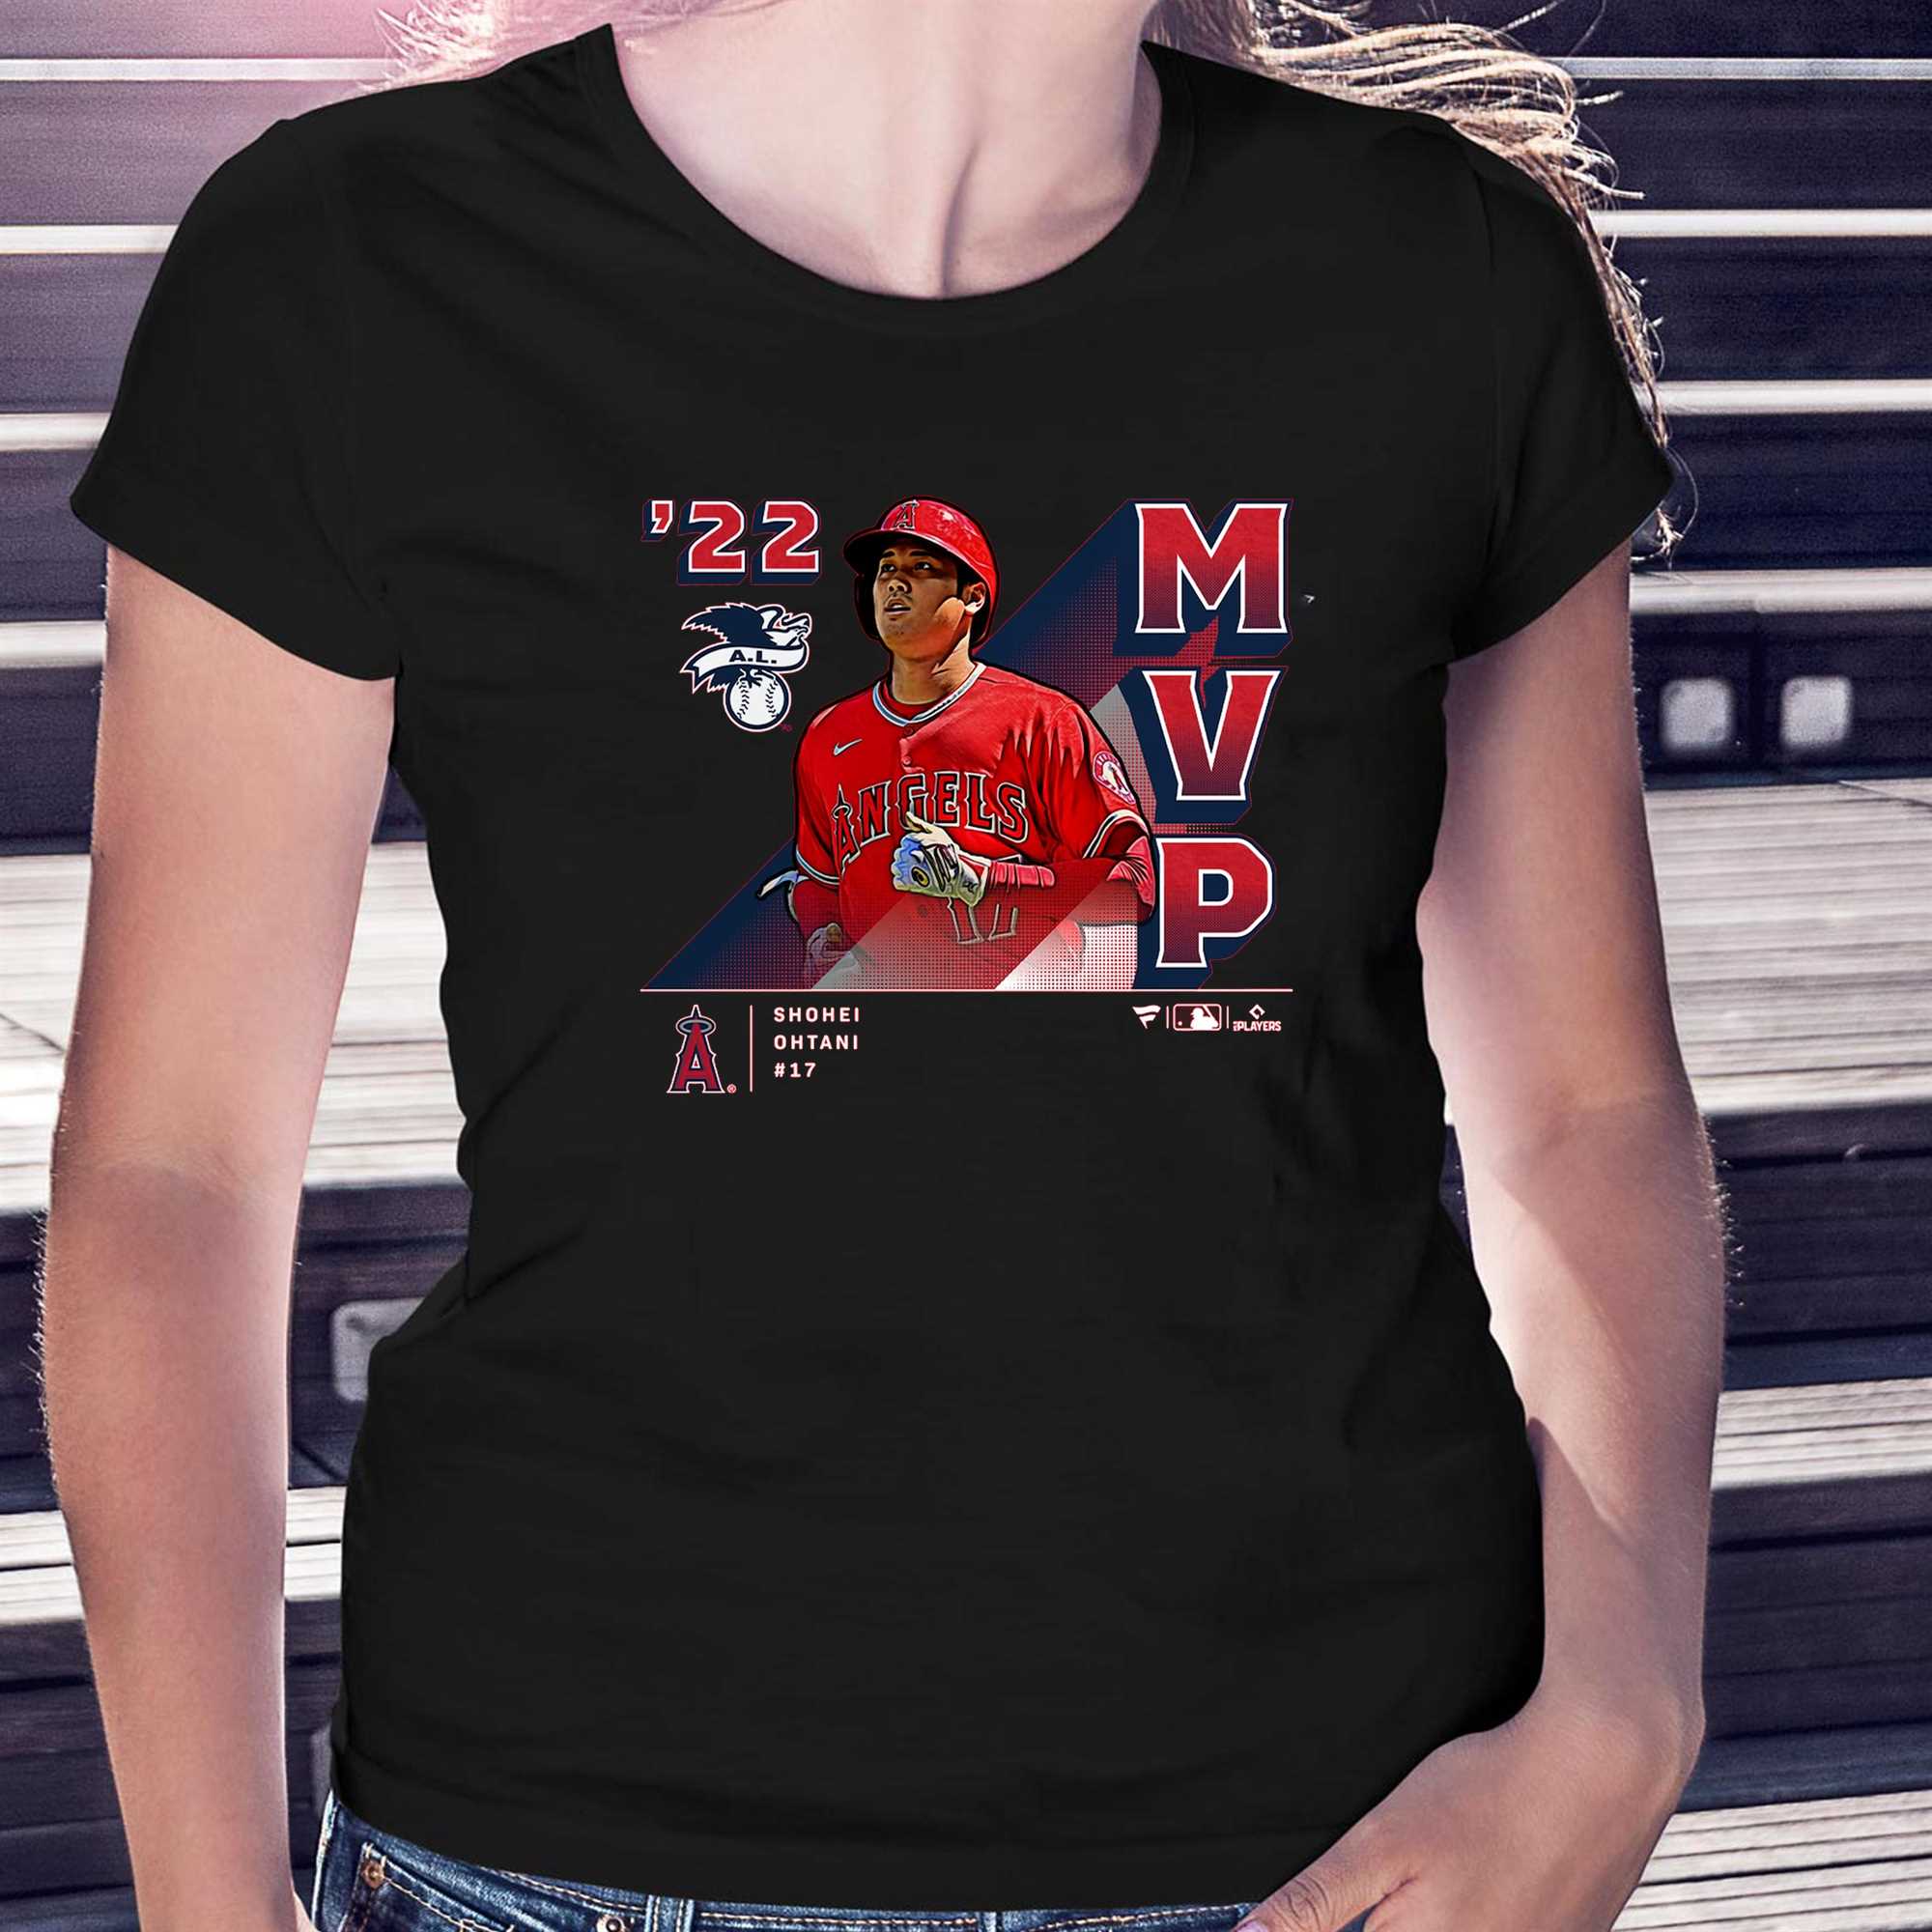 Los Angeles Angels - New Ohtani MVP shirts have been added! Visit